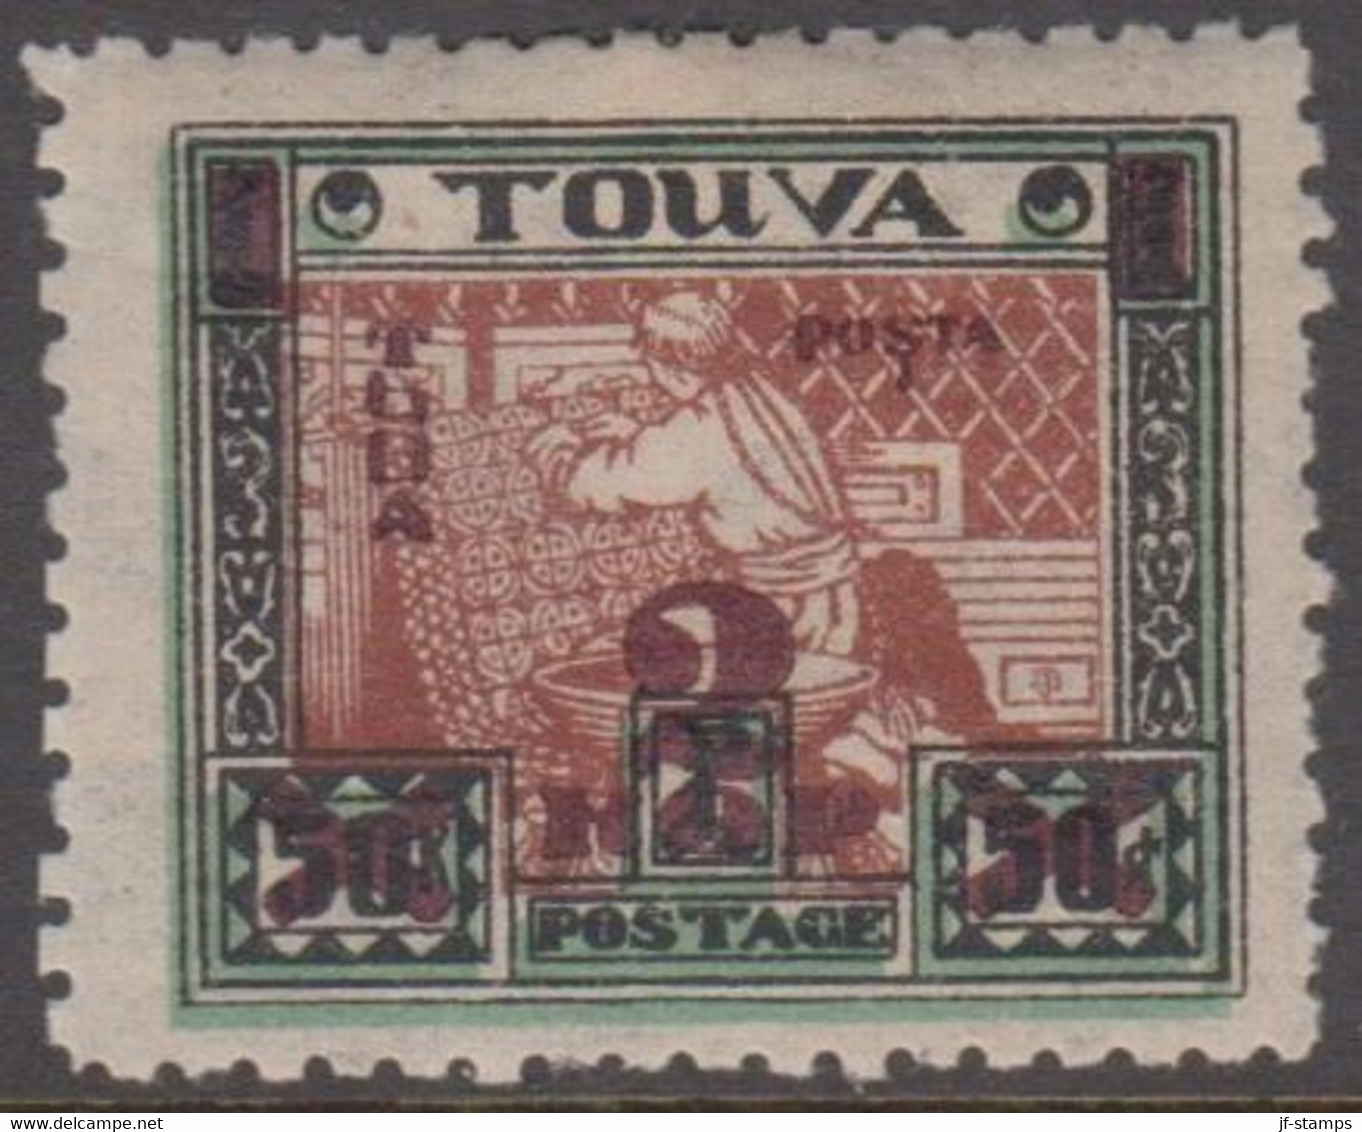 1932. POSTA TOUVA. 2 Kop On 50 K Surcharged Country Motives. Hinged.  () - JF413762 - Tuva